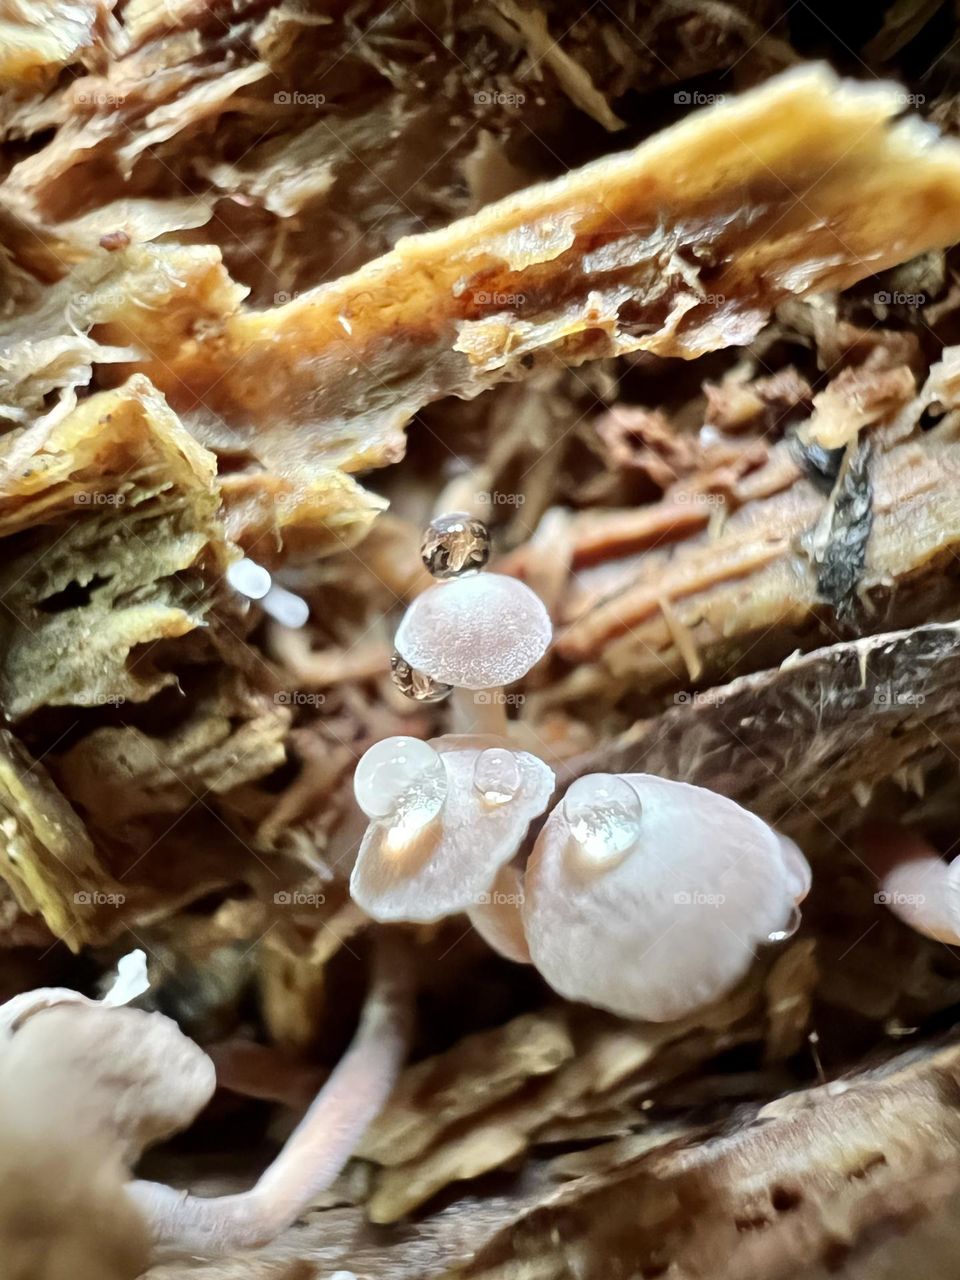 Extreme closeup of water droplets on tiny fungi, growing on a decaying log. The whole scene is the scale of a fingertip.